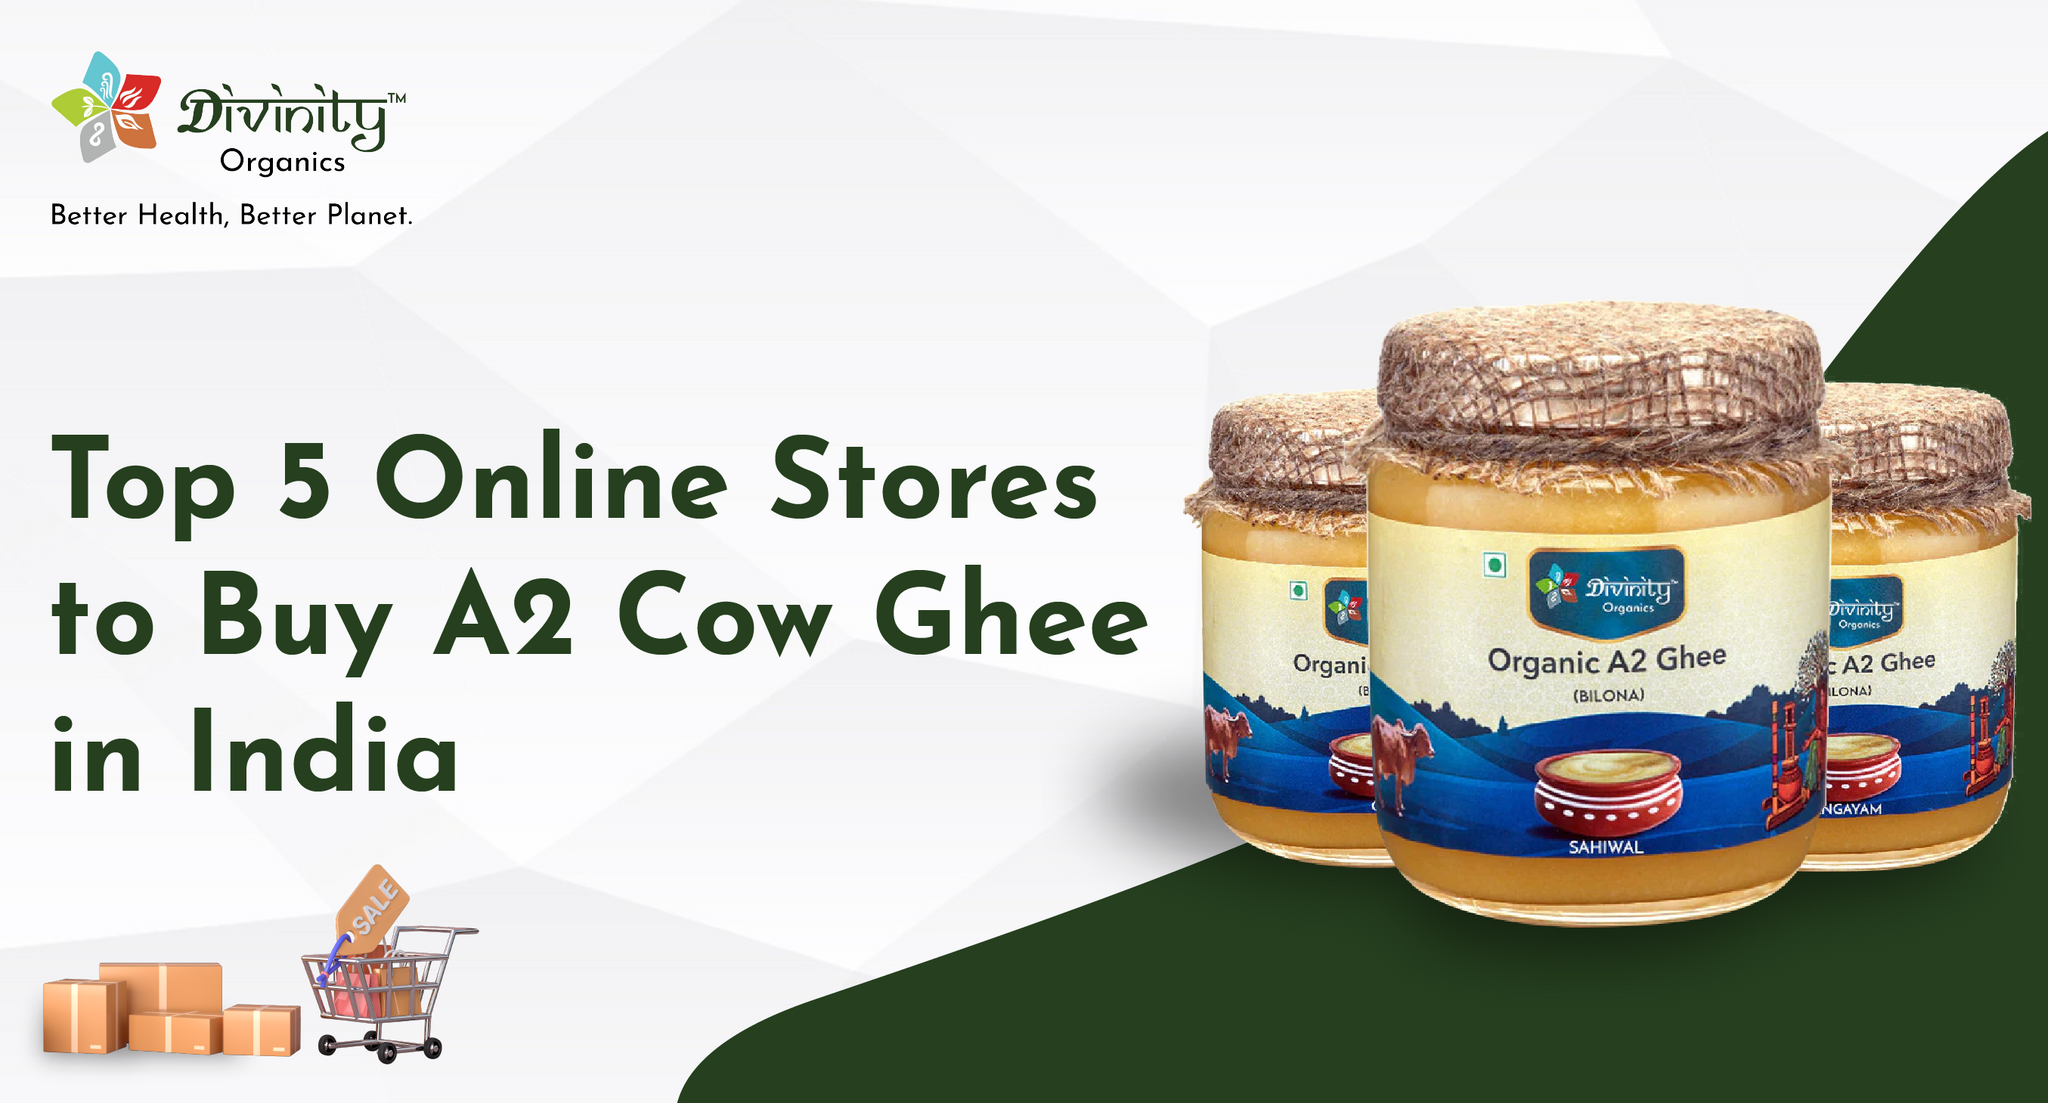 Top 5 Online Stores to Buy A2 Cow Ghee in India